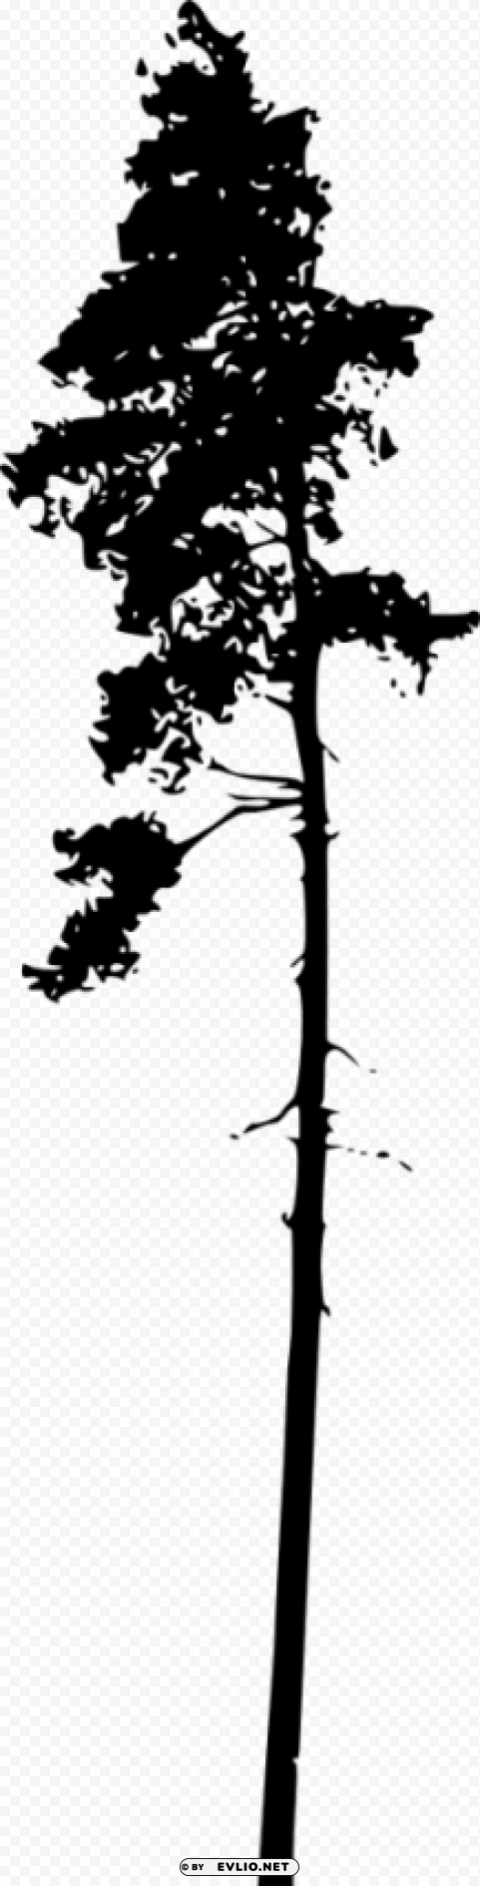 pine tree silhouette Transparent PNG image